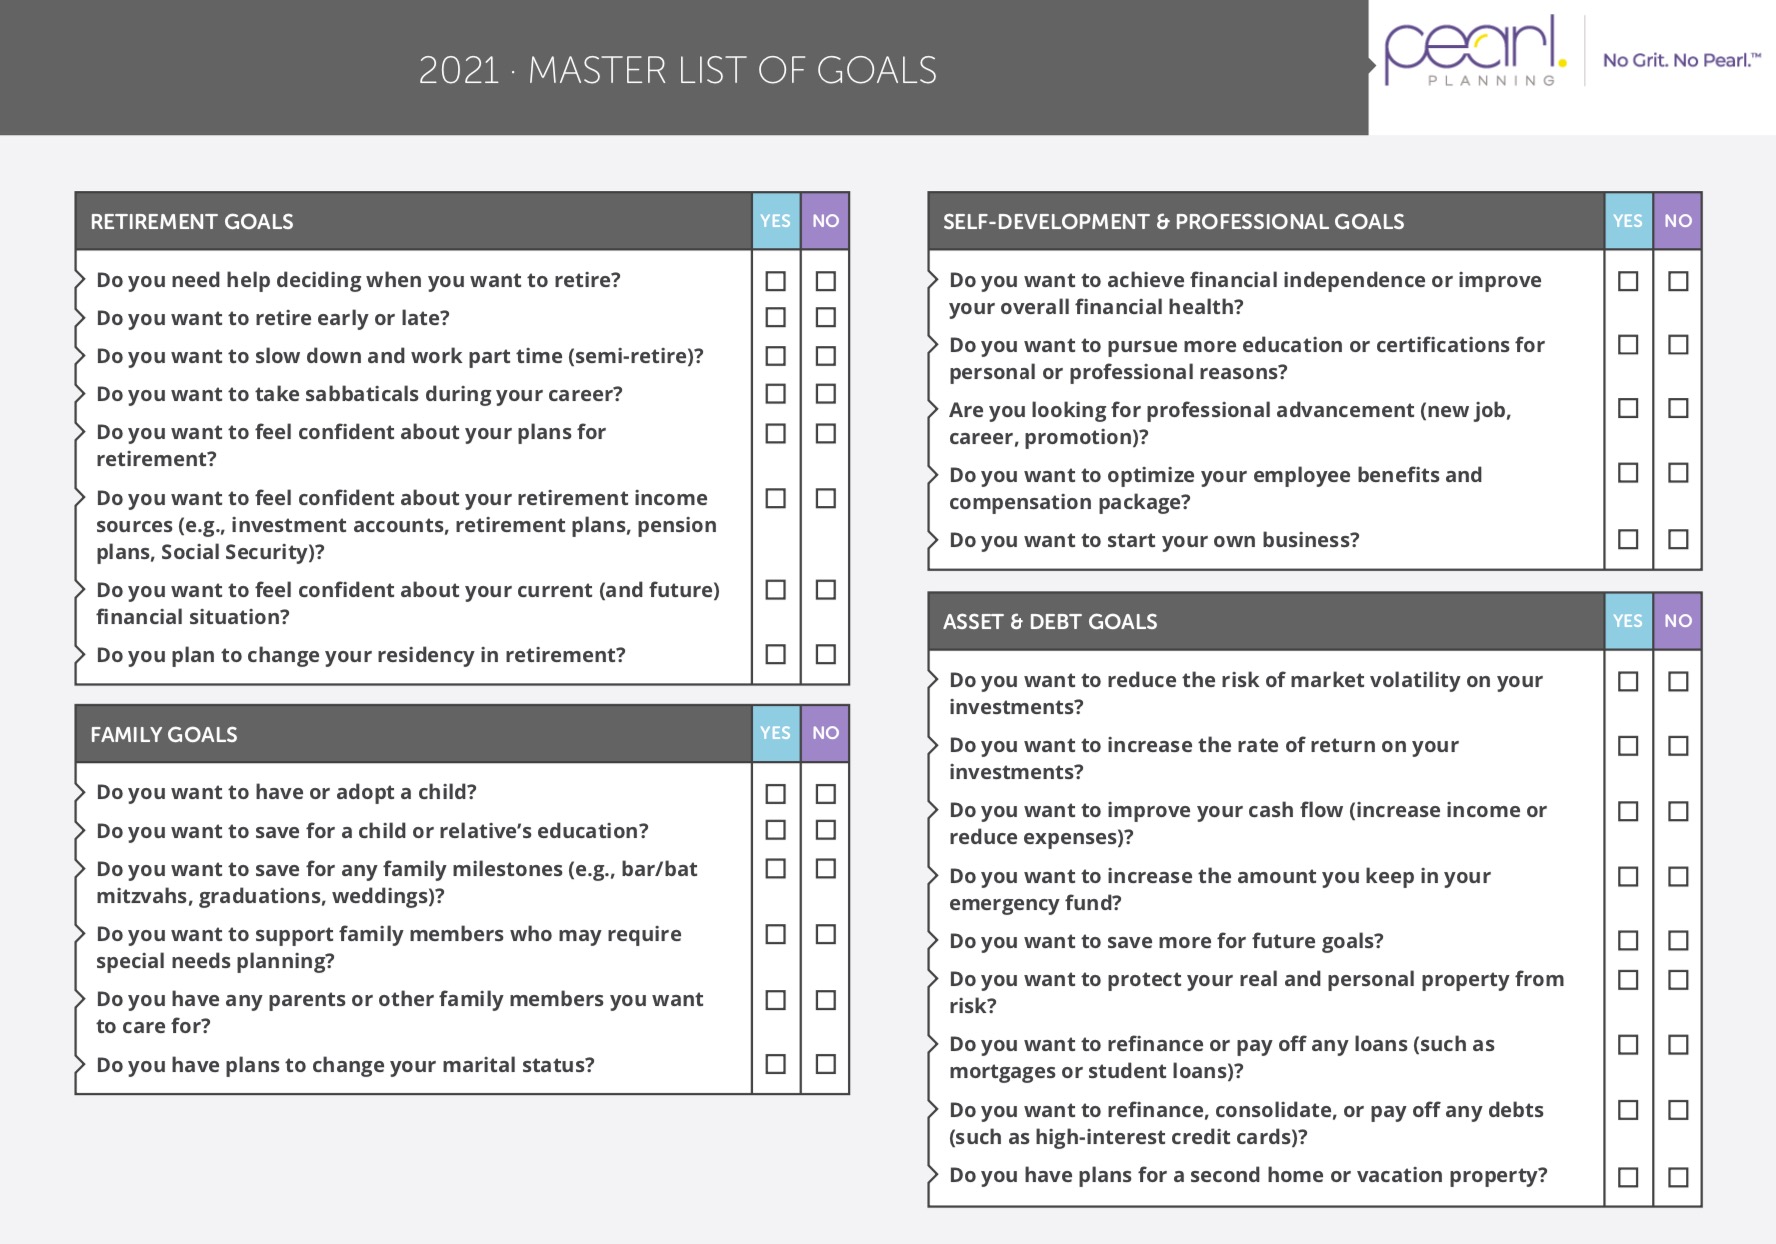 Preview of goals checklist PDF download